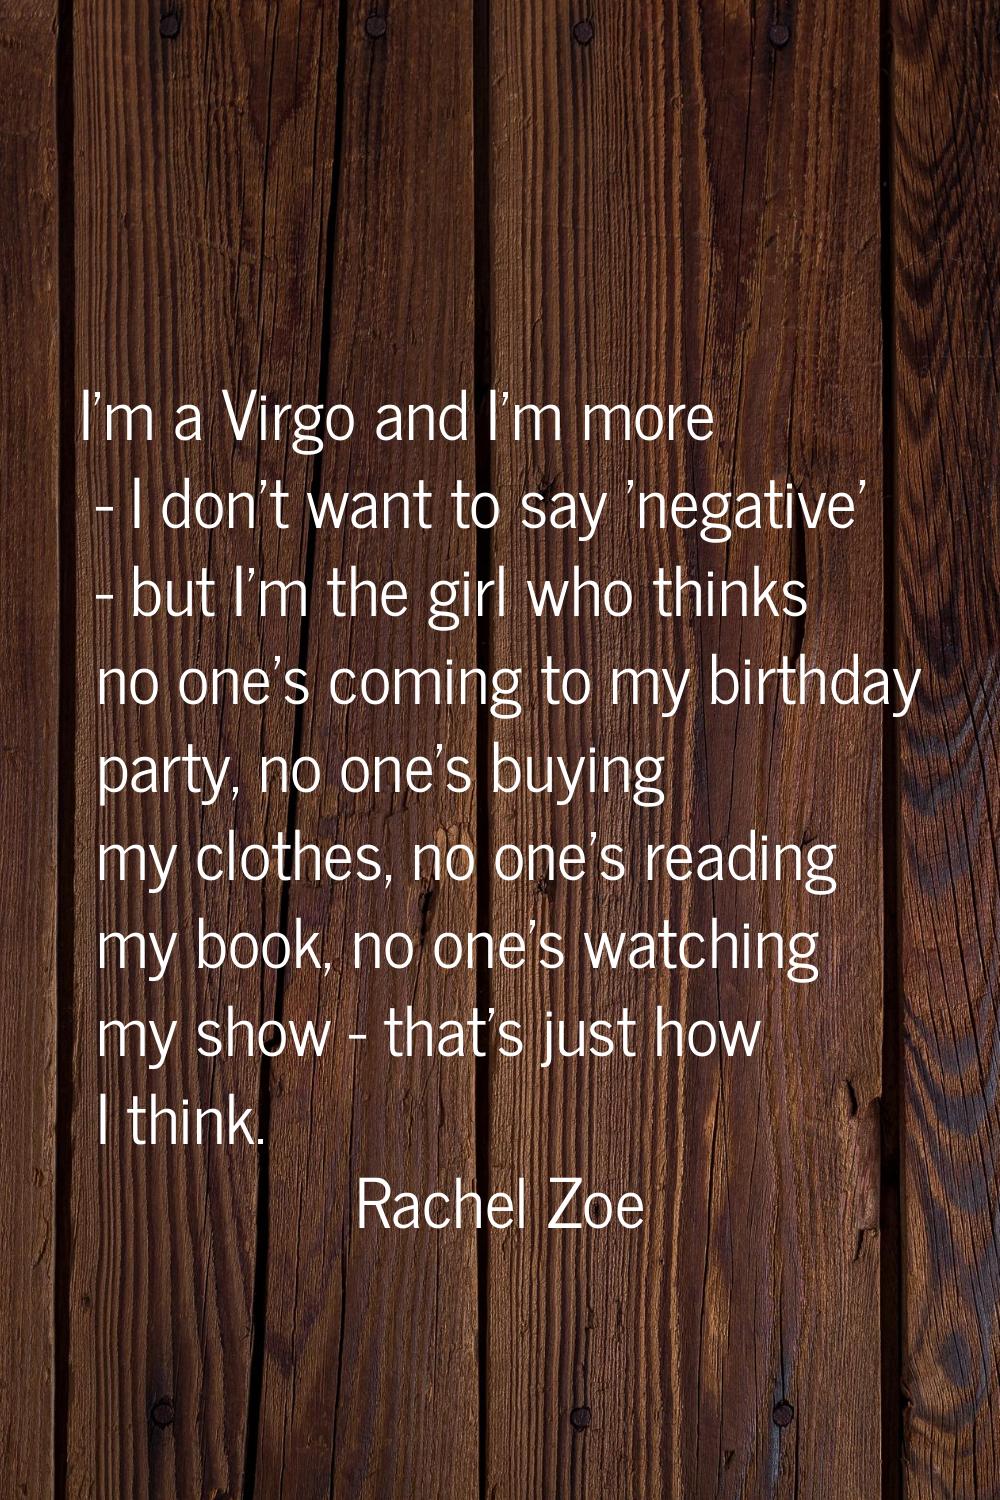 I'm a Virgo and I'm more - I don't want to say 'negative' - but I'm the girl who thinks no one's co